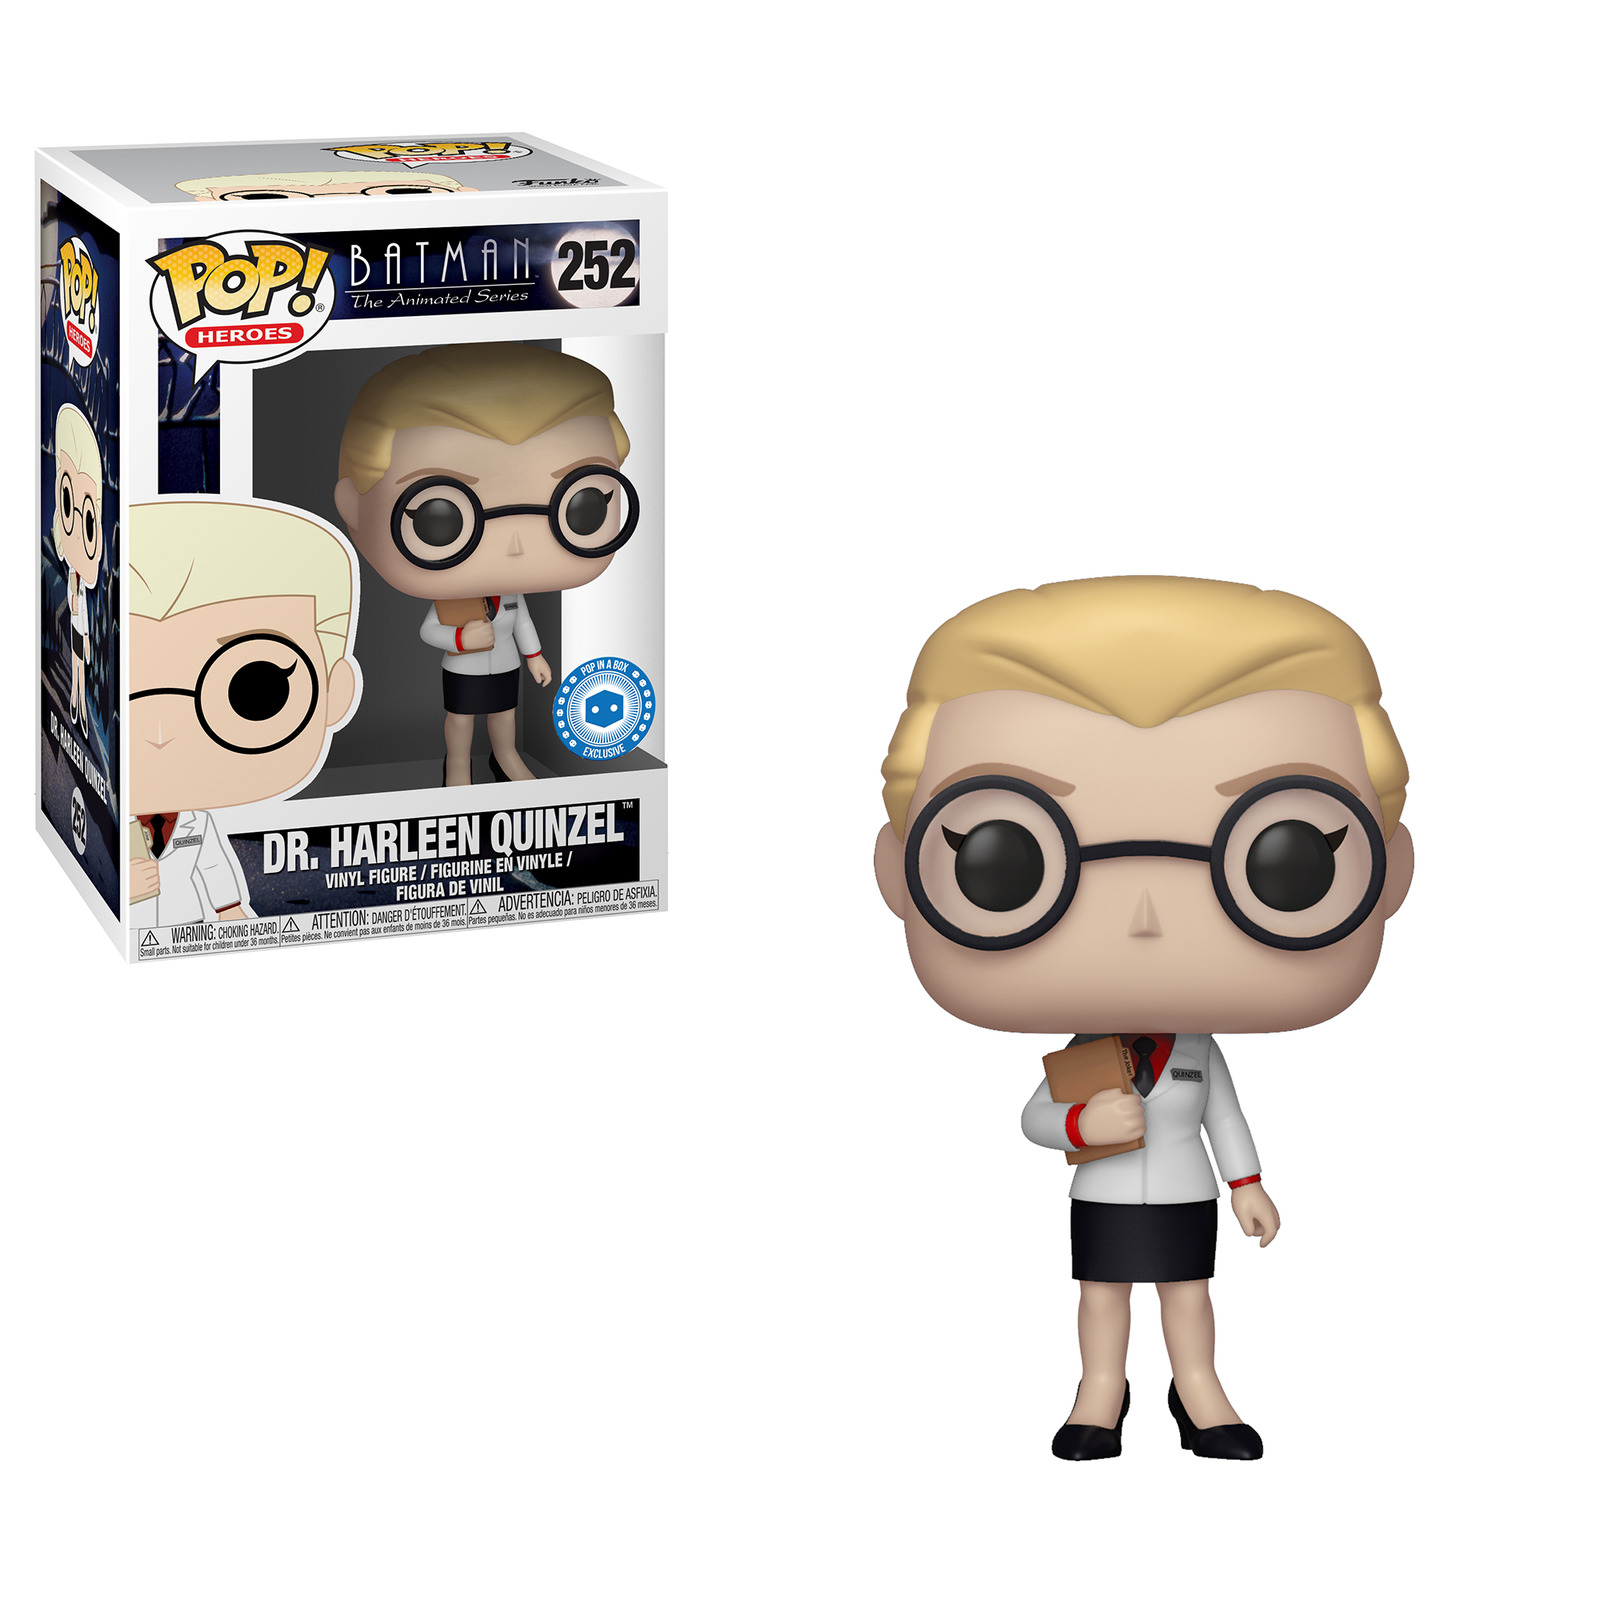 Funko POP Batman The Animated Series - Dr. Harleen Quinzel #252 - Pop in a Box